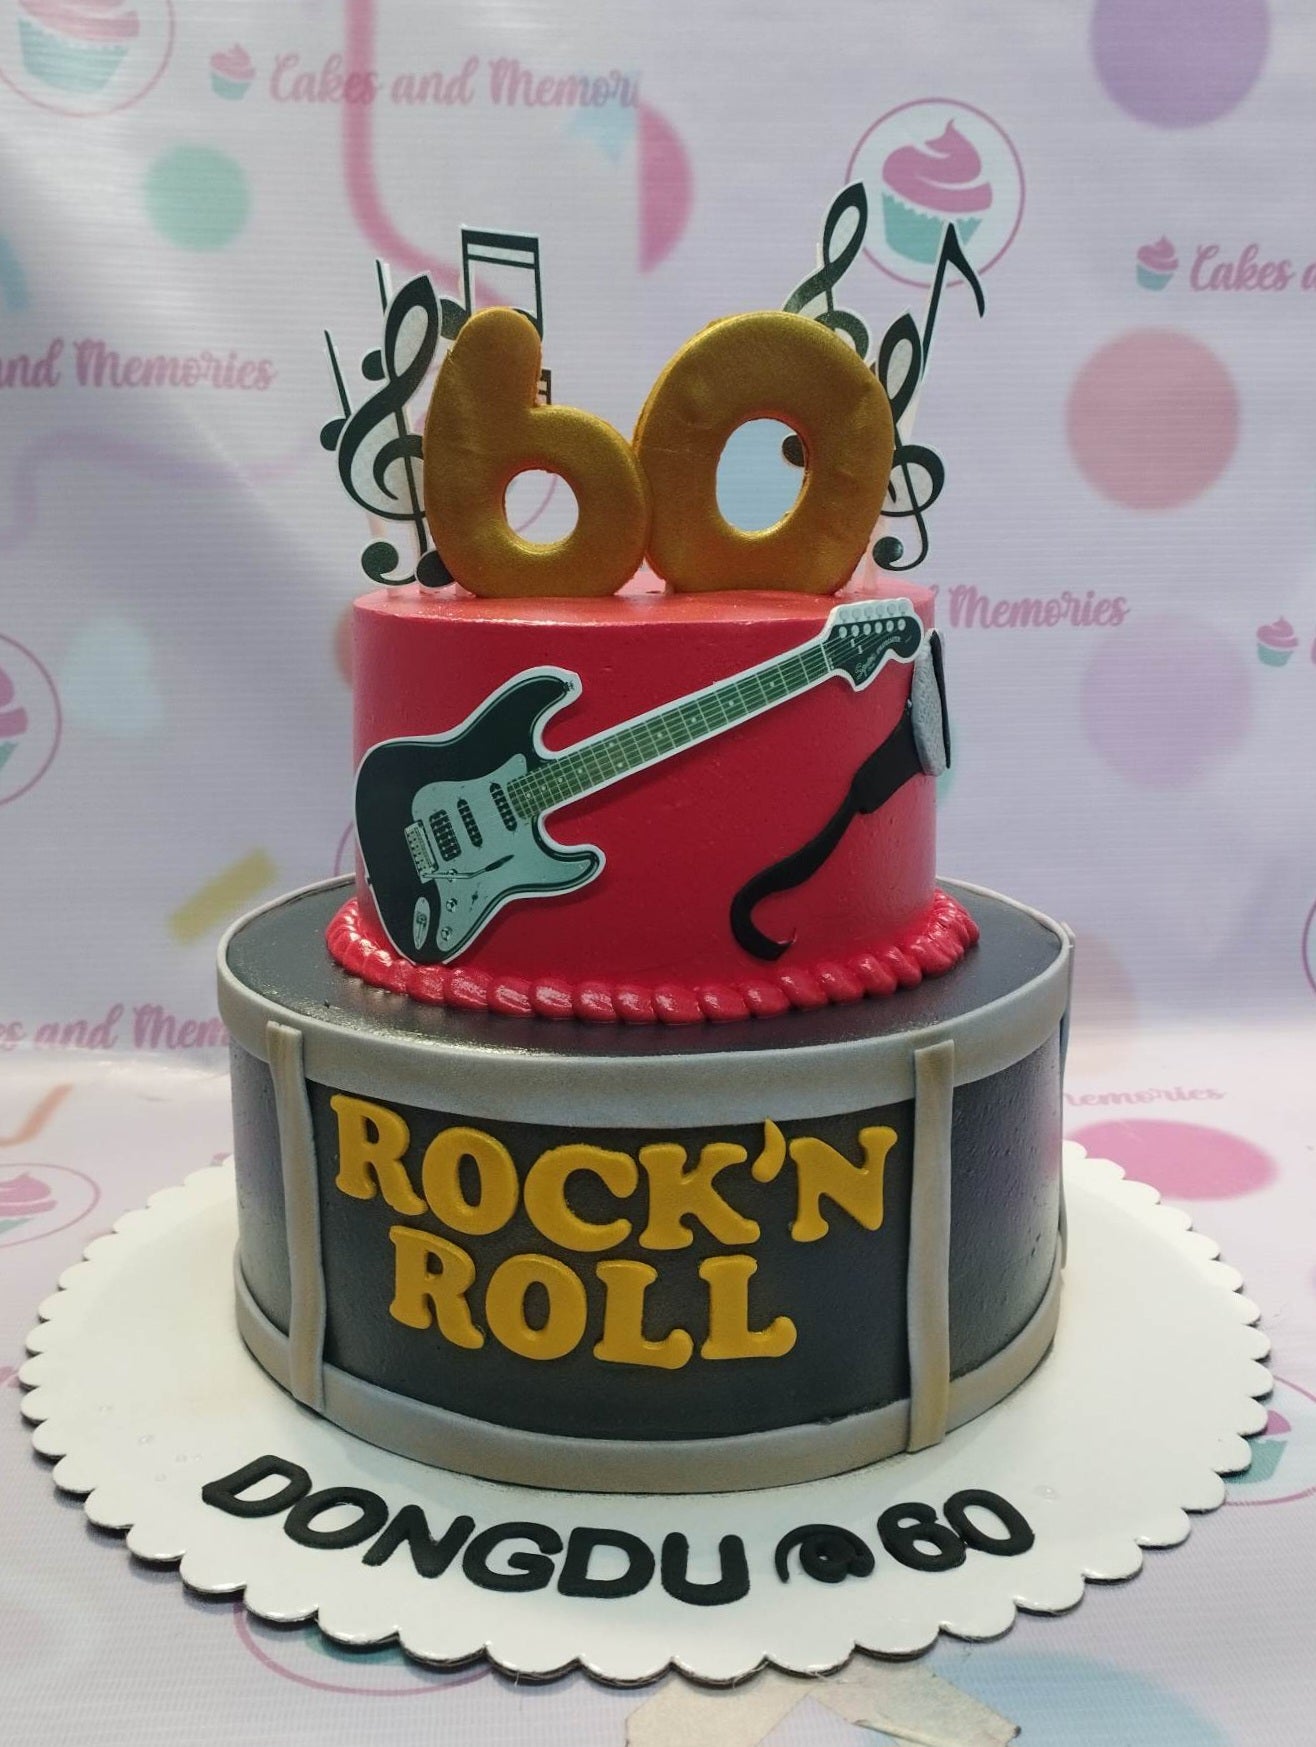 Party, Novelty

This beautiful custom decorated cake is perfect for any music lover. It features a realistic electric guitar, musical notes, and colorful chords all against a red background. It even has drums and guitars to give it a rock band vibe. Perfect for any special occasion or party, this high-quality cake will not disappoint.